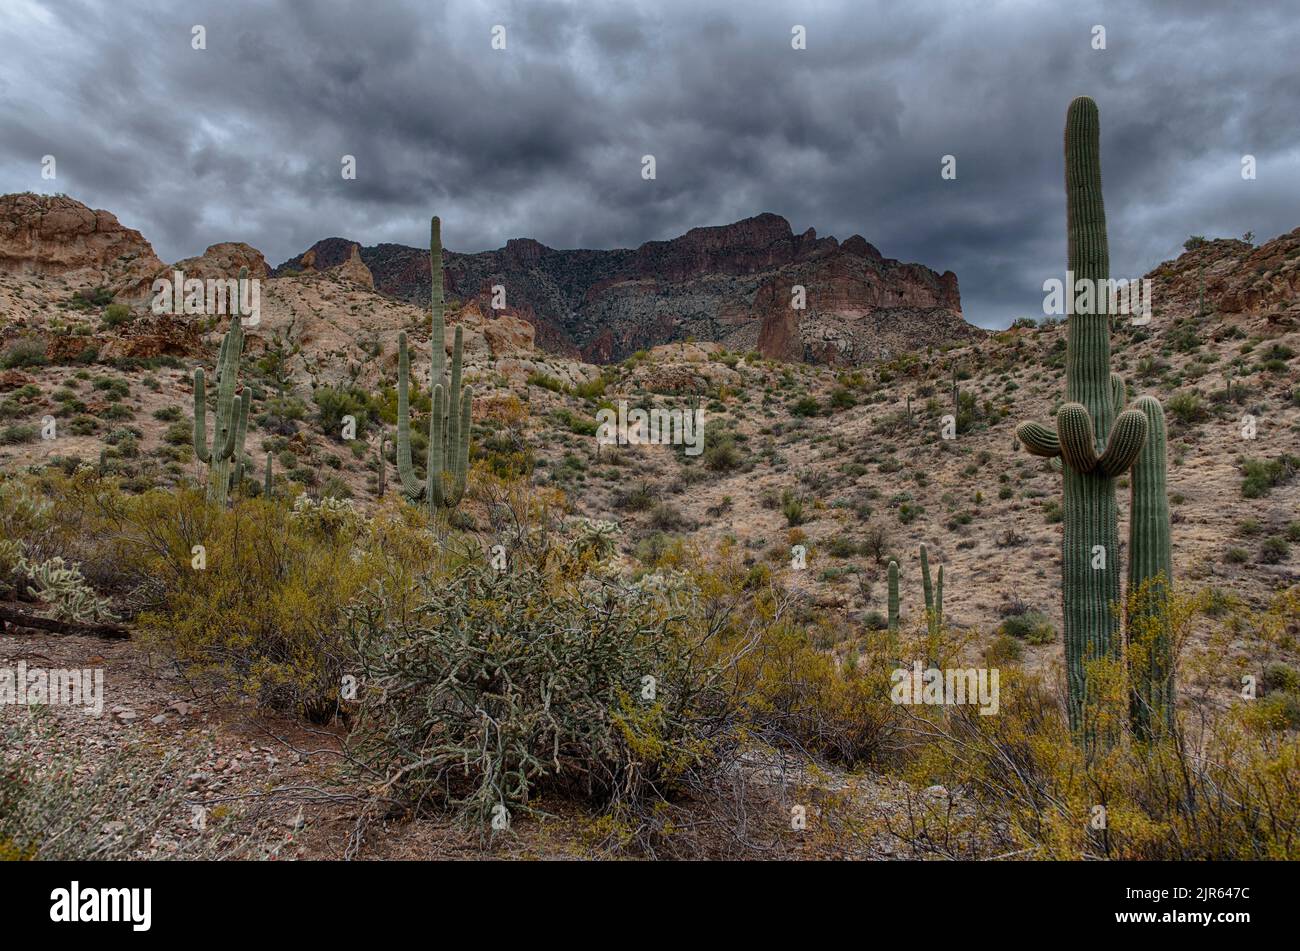 Beautiful desert landscape with cacti vegetaition in The Superstitions, Arizona Stock Photo